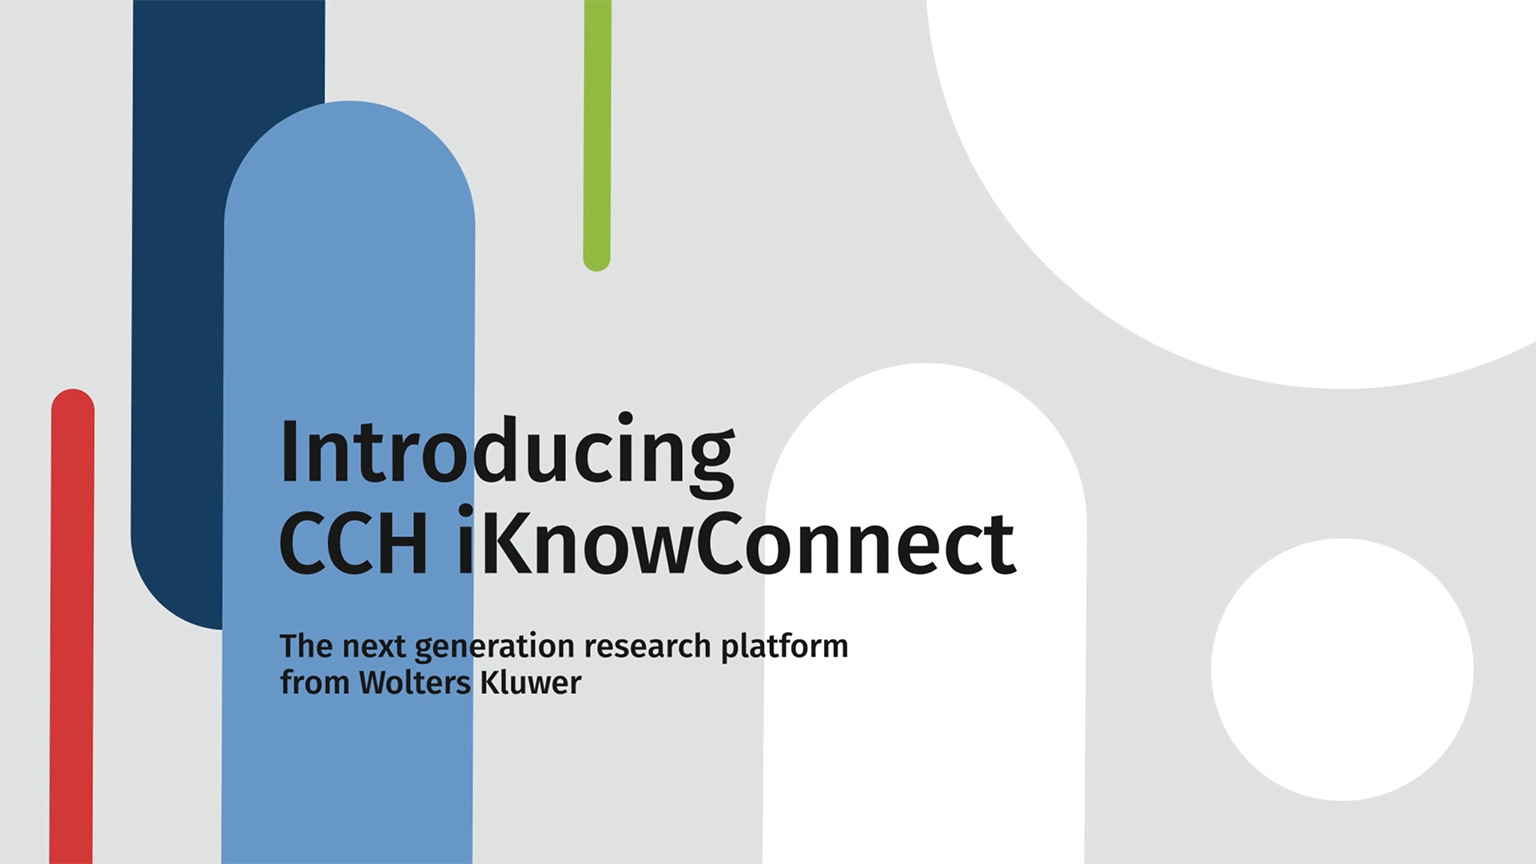 Screenshot of Introducing CCH iKnowConnect (launched) video